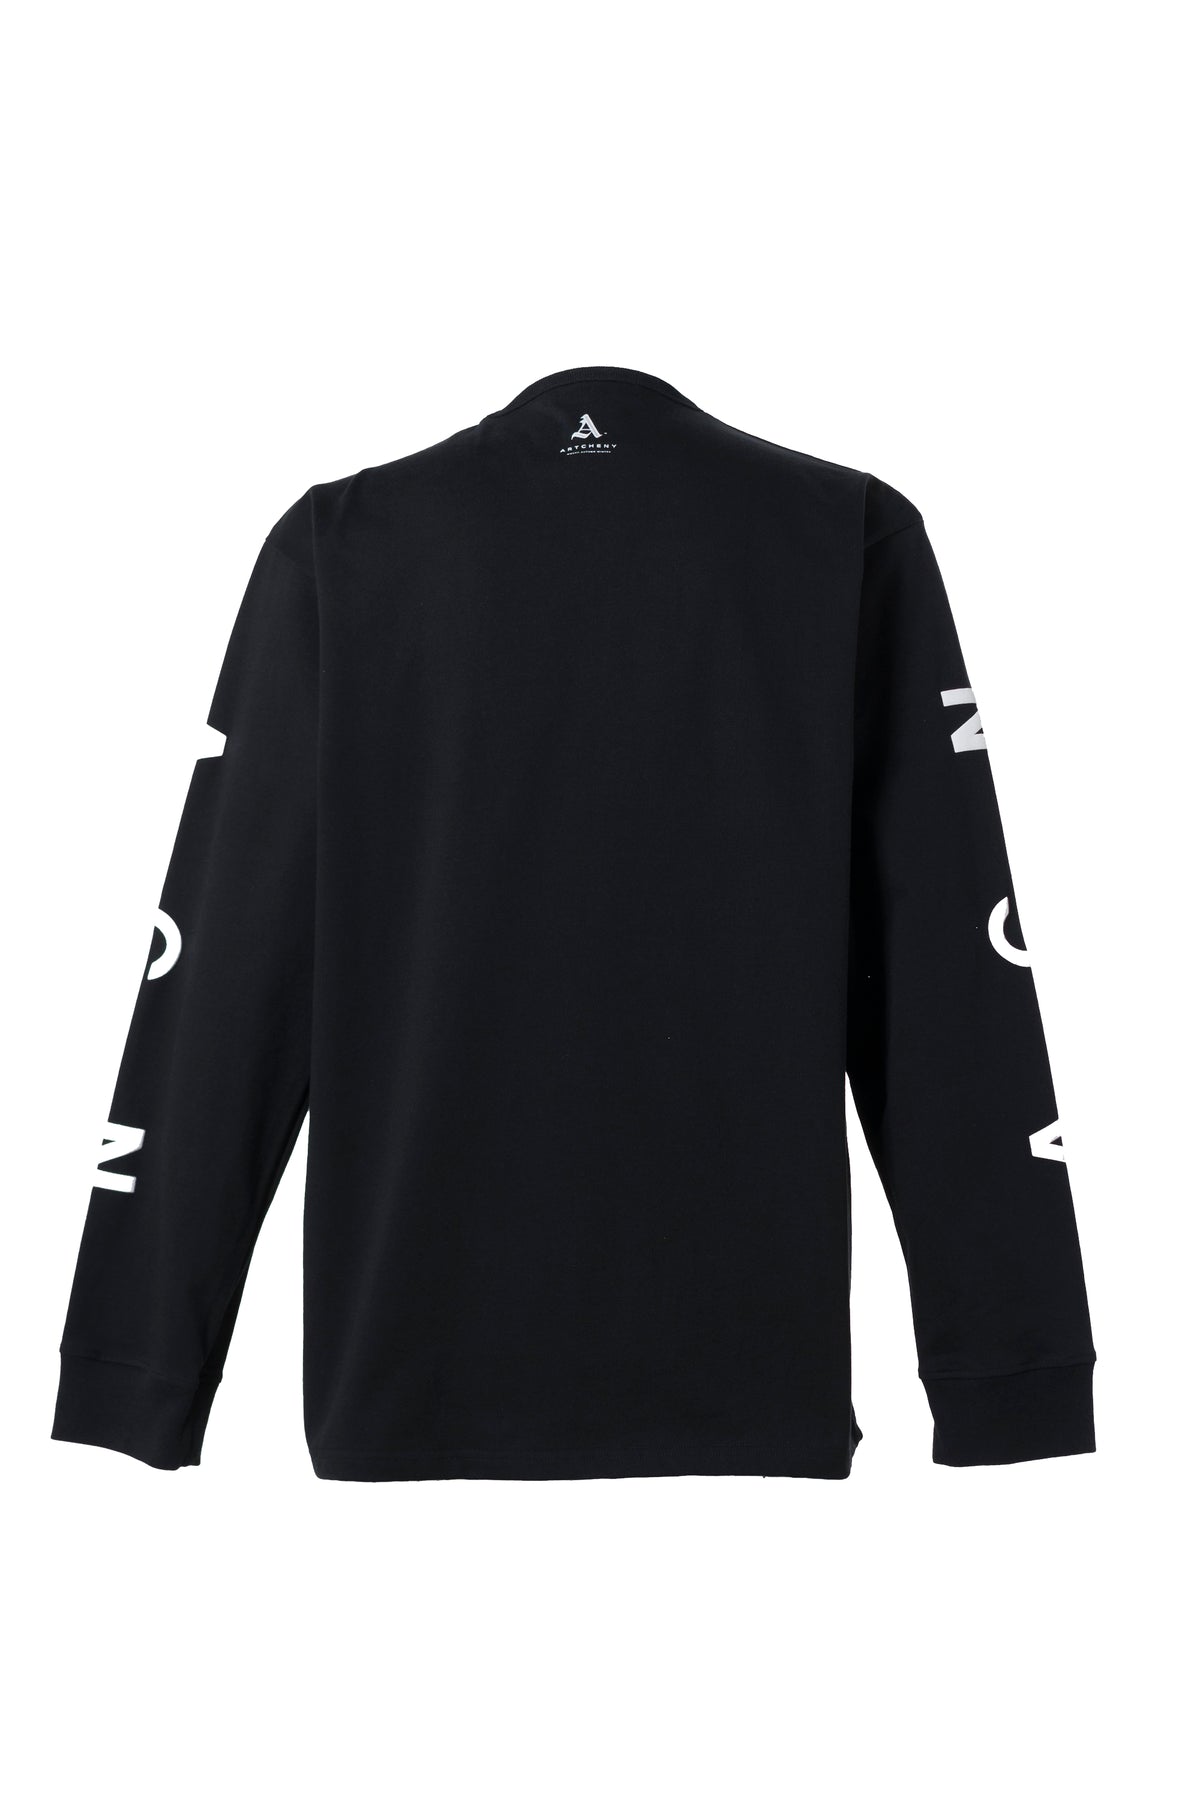 ARTCHENY LONG SLEEVE T-SHIRTS HELL / BLK